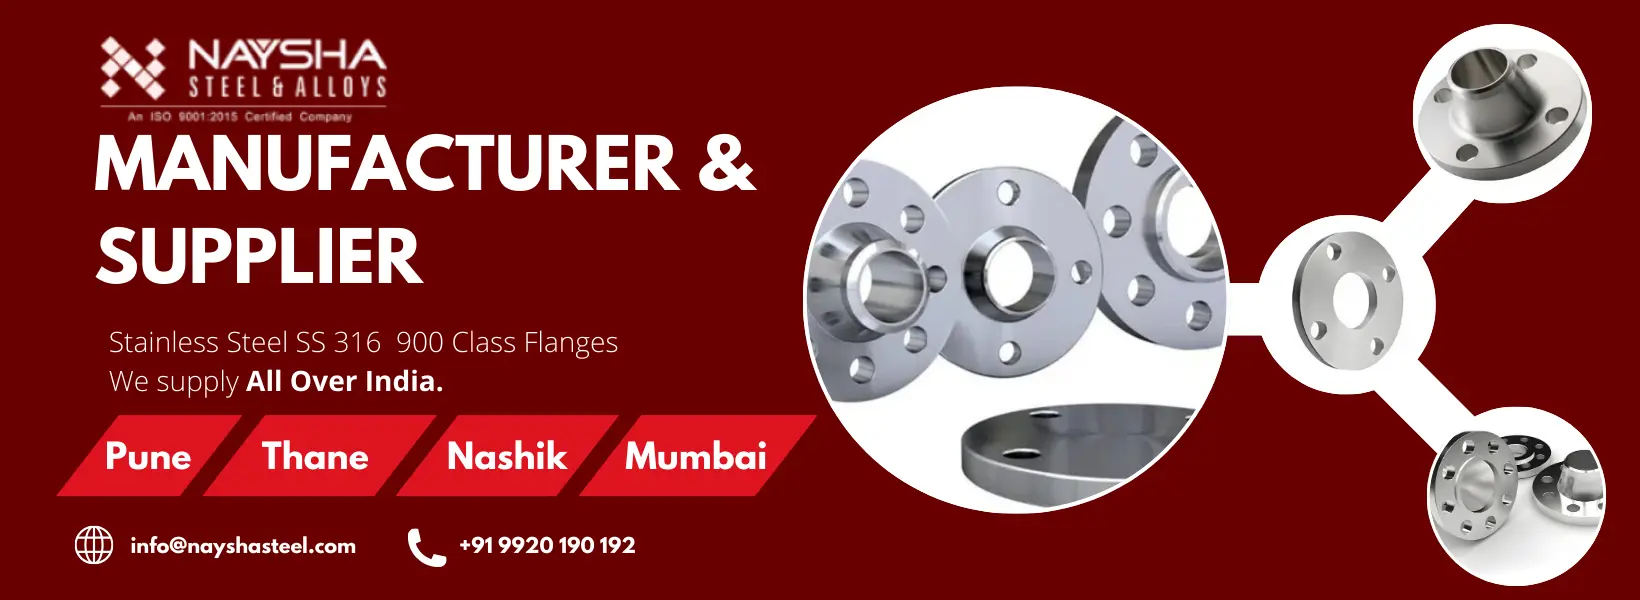 stainless steel 316 900 class flanges banner